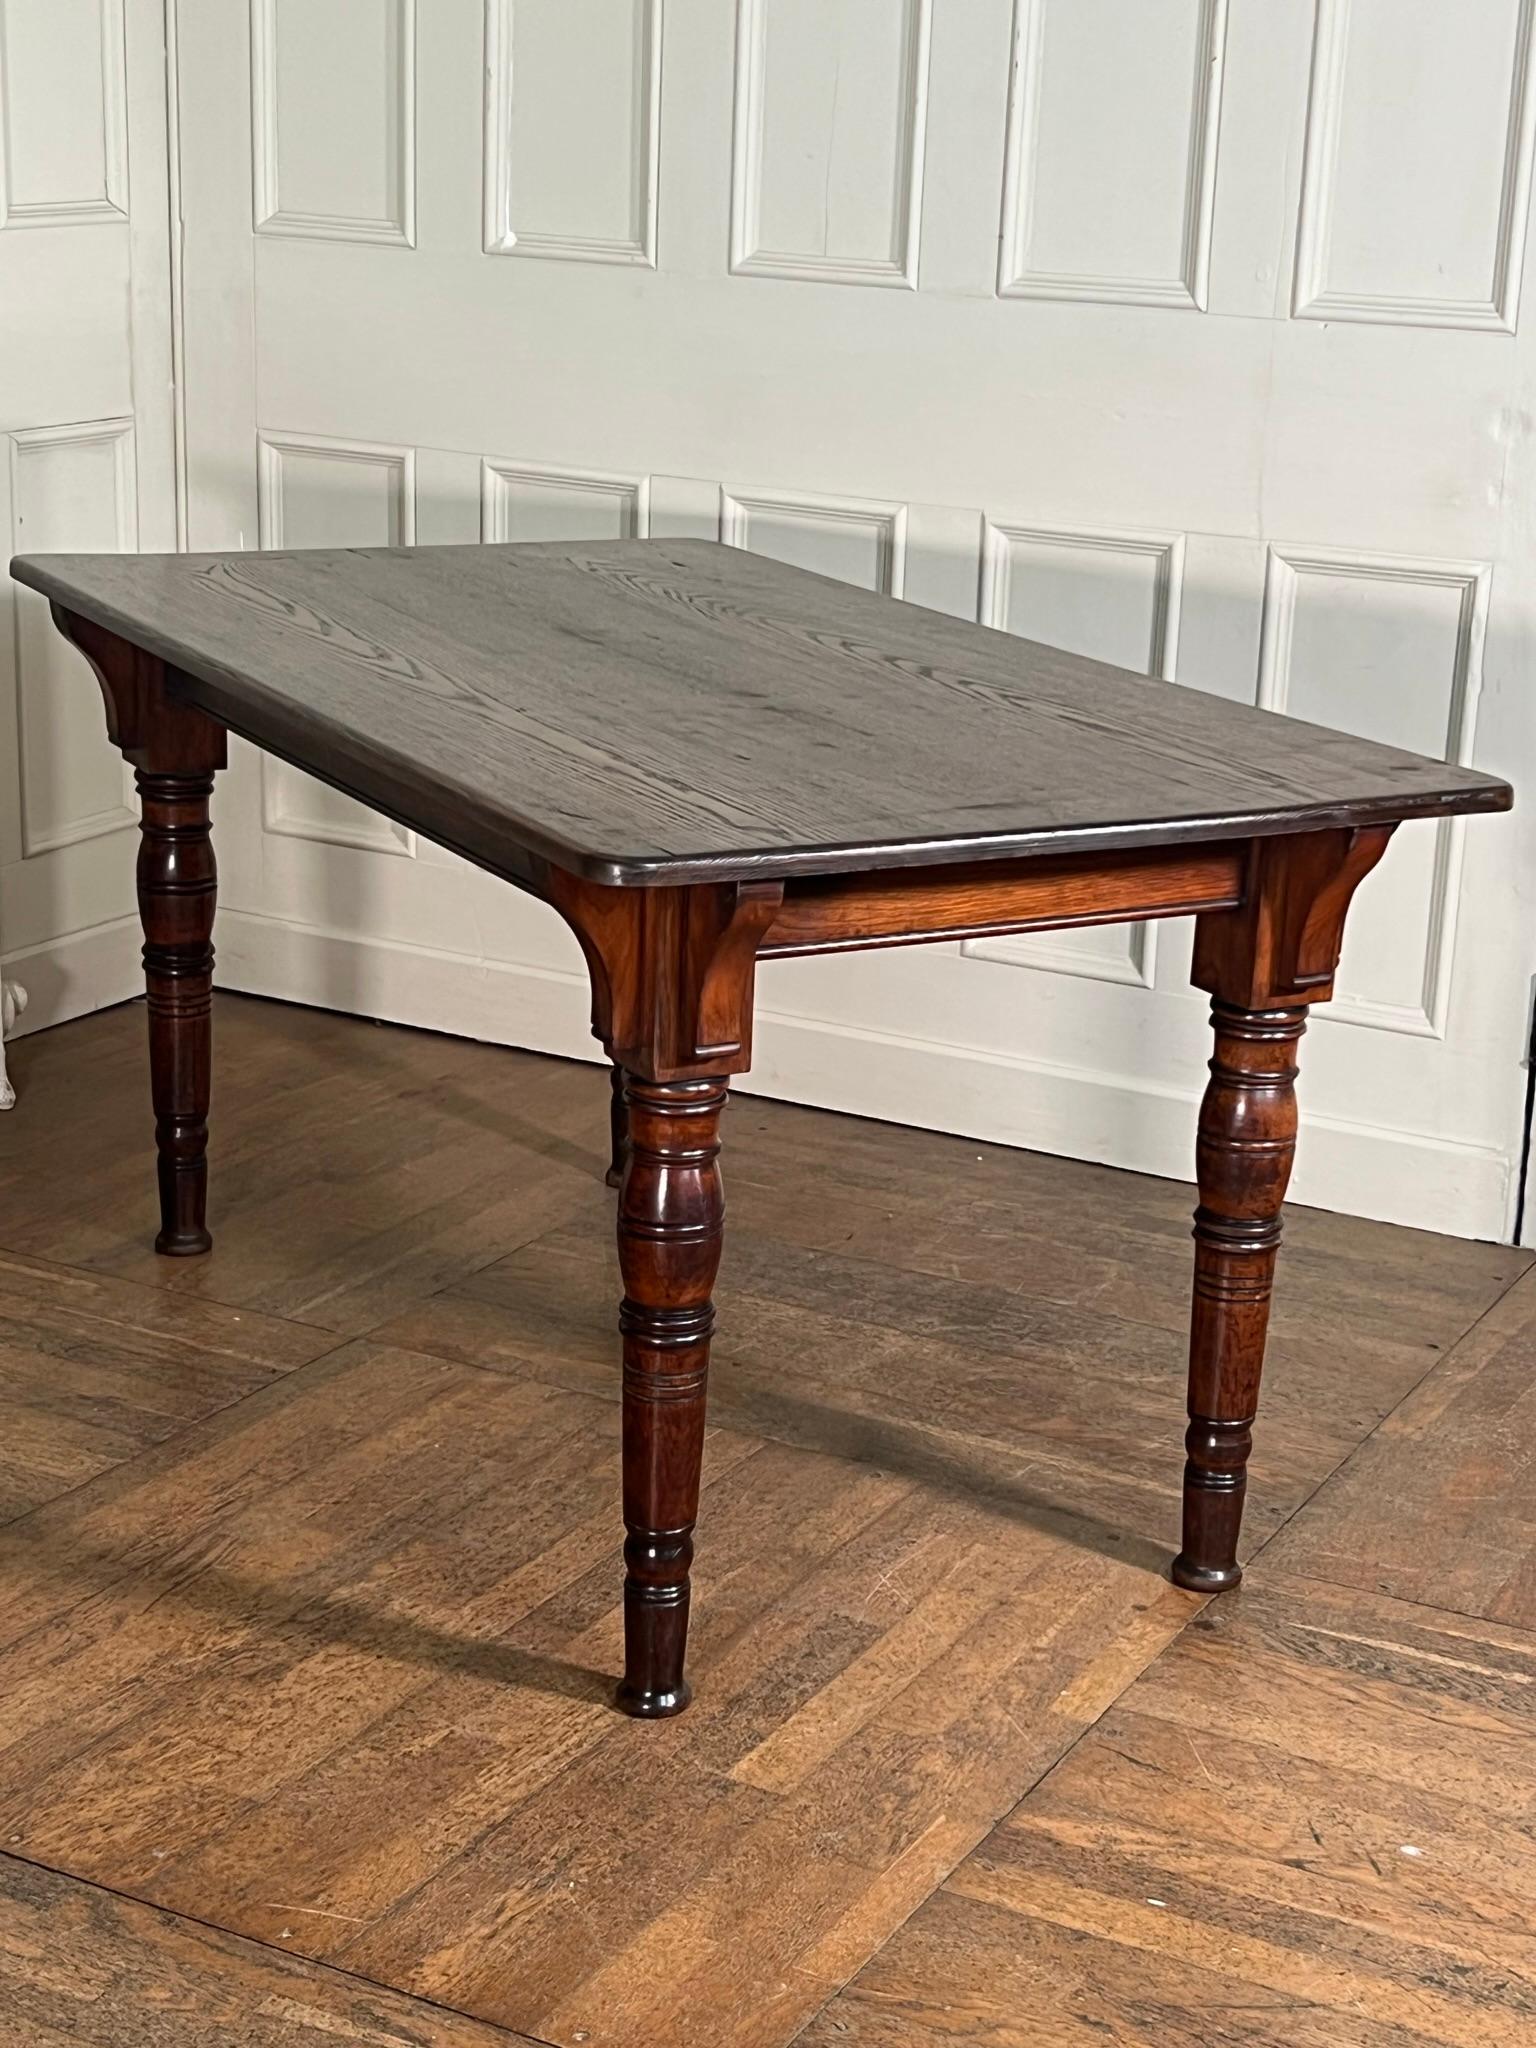 19th Century Gillows of Lancaster Table In Good Condition For Sale In Warrington, GB